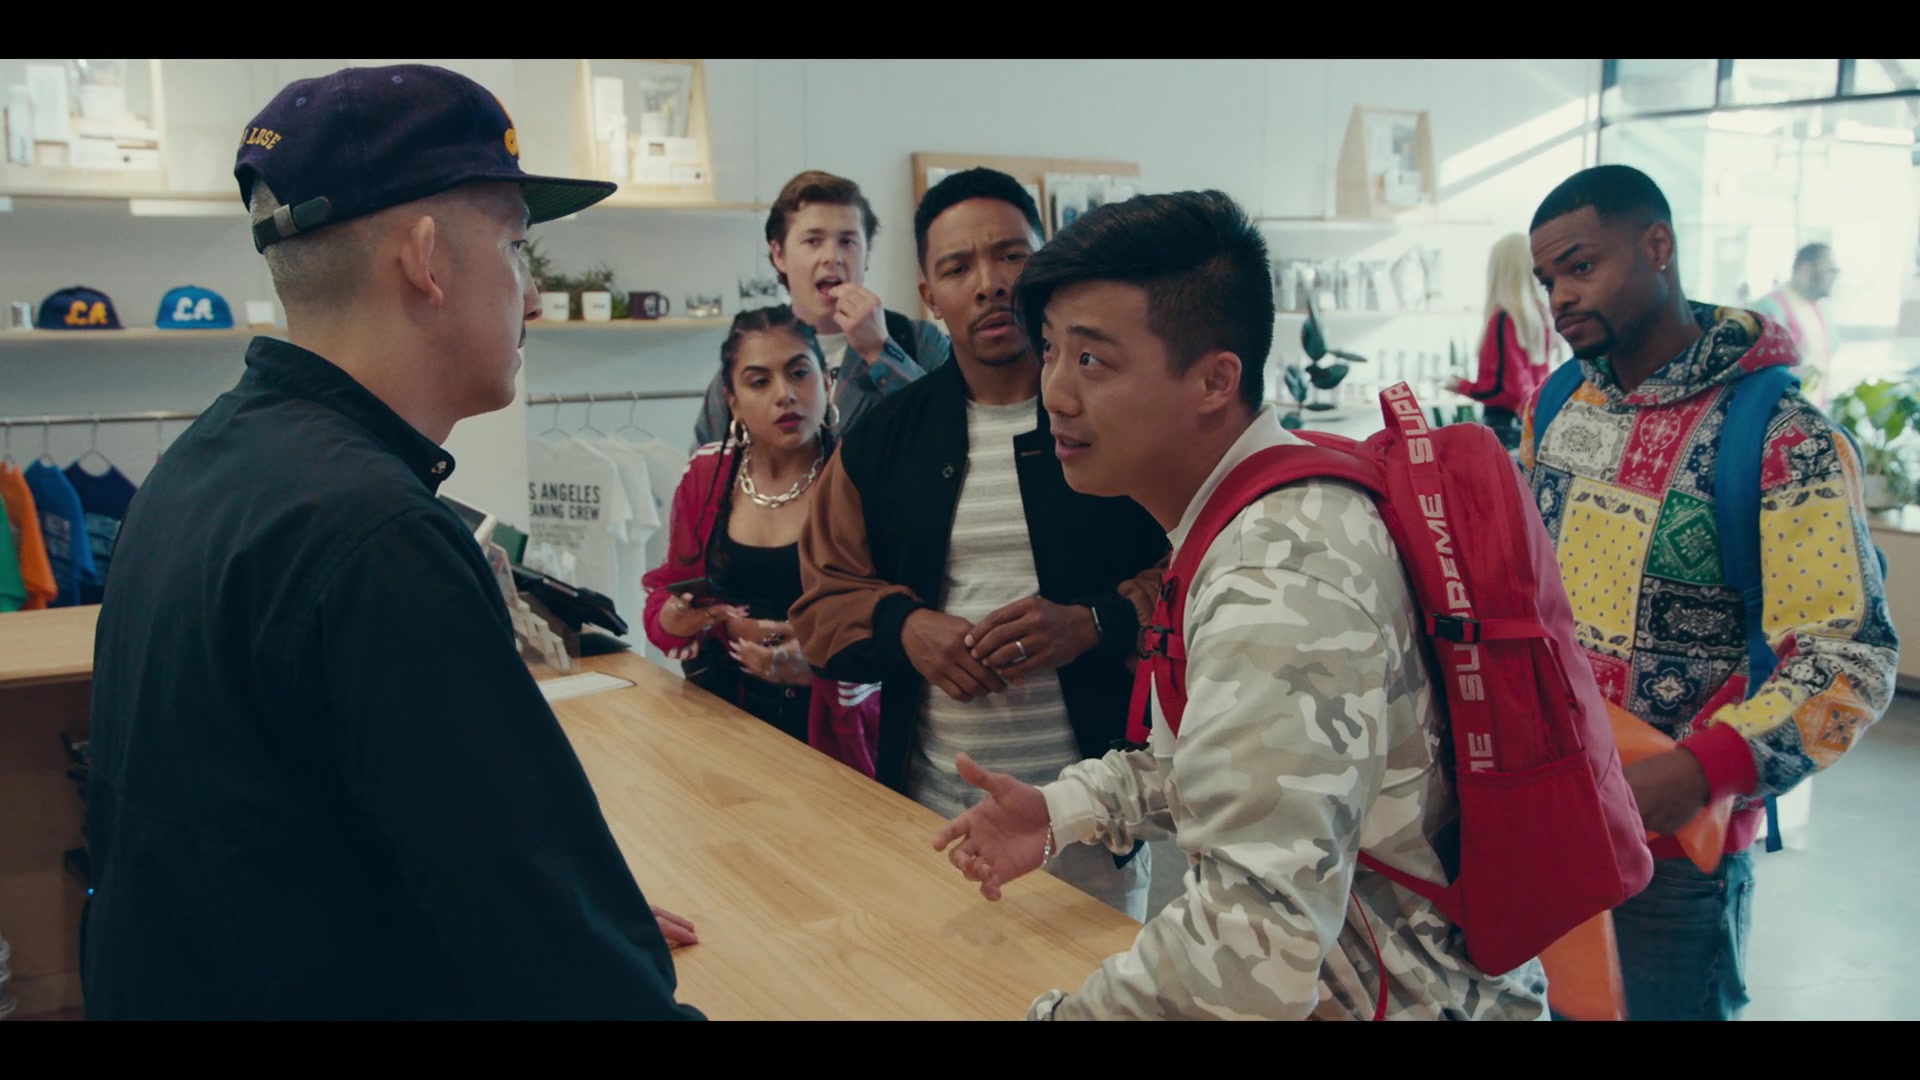 Supreme Red Backpack Of Actor Justin Lee As Cole In Sneakerheads Season 1  Episode 6 (2020)